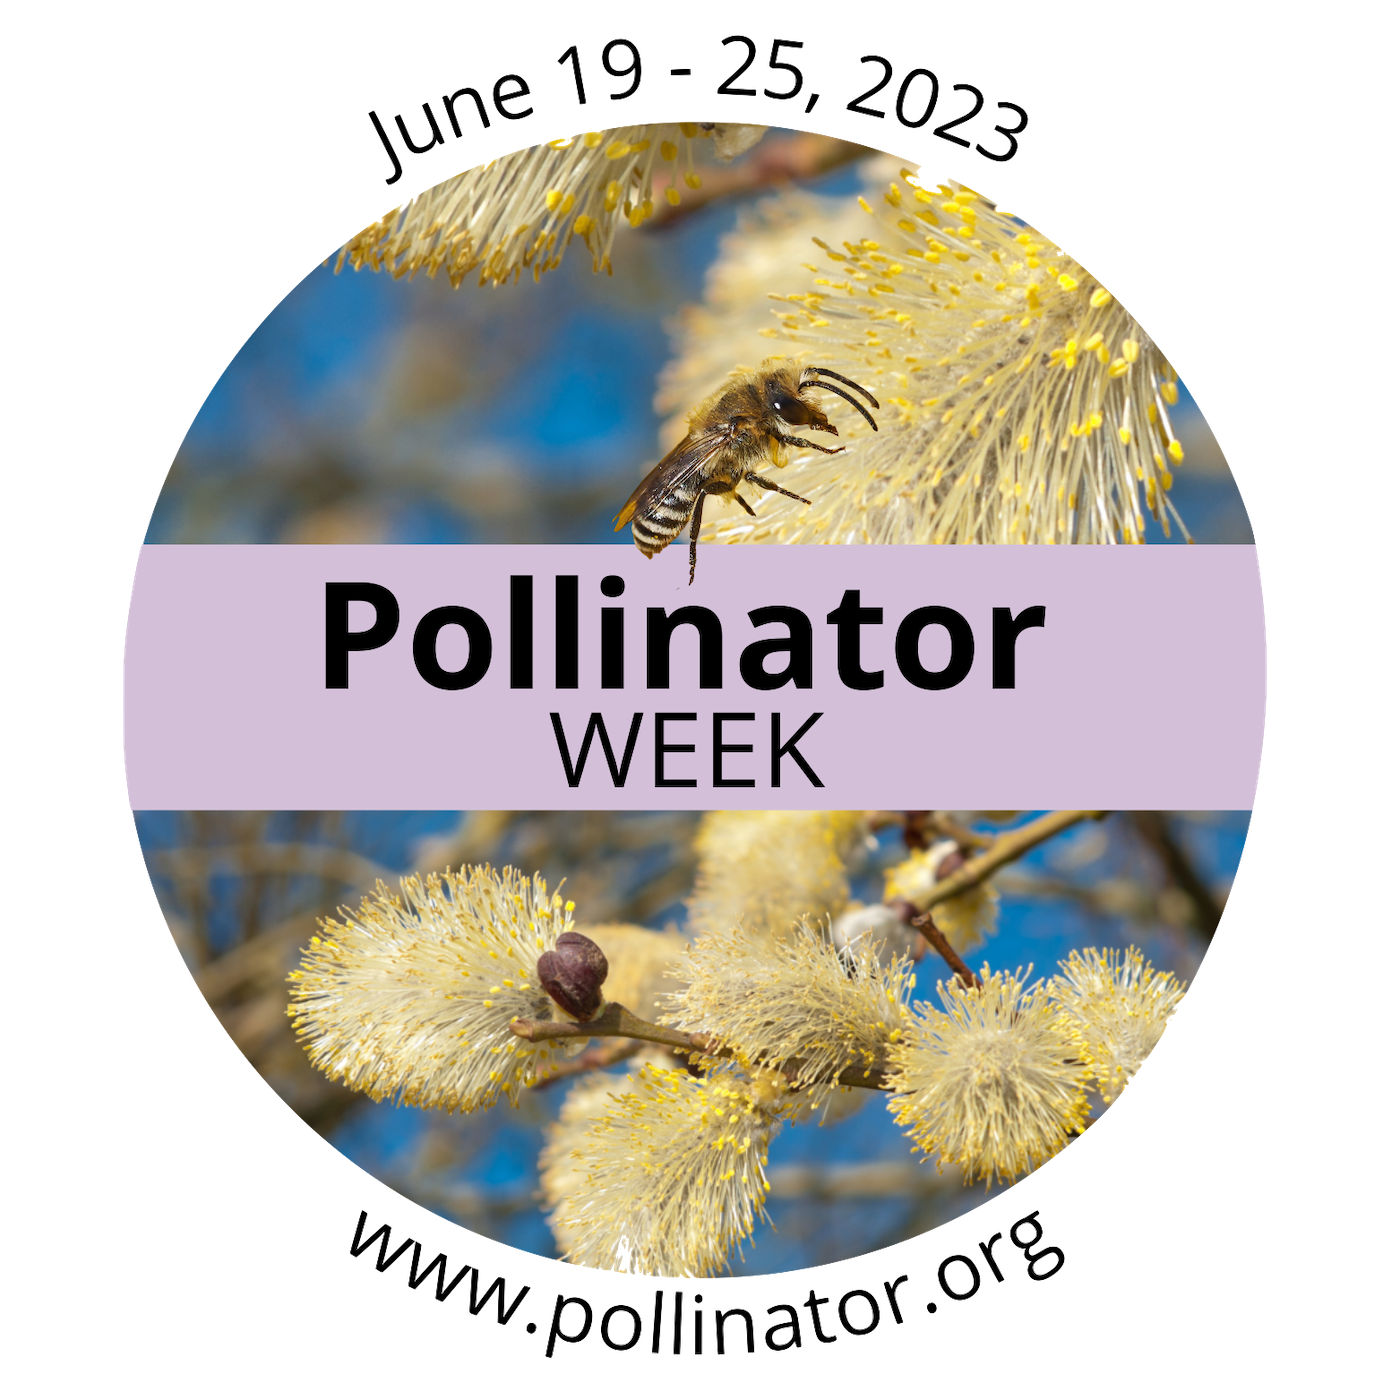 Pollinator Week informational logo, including the dates June 19-25, 2023 and the website www.pollinator.org.